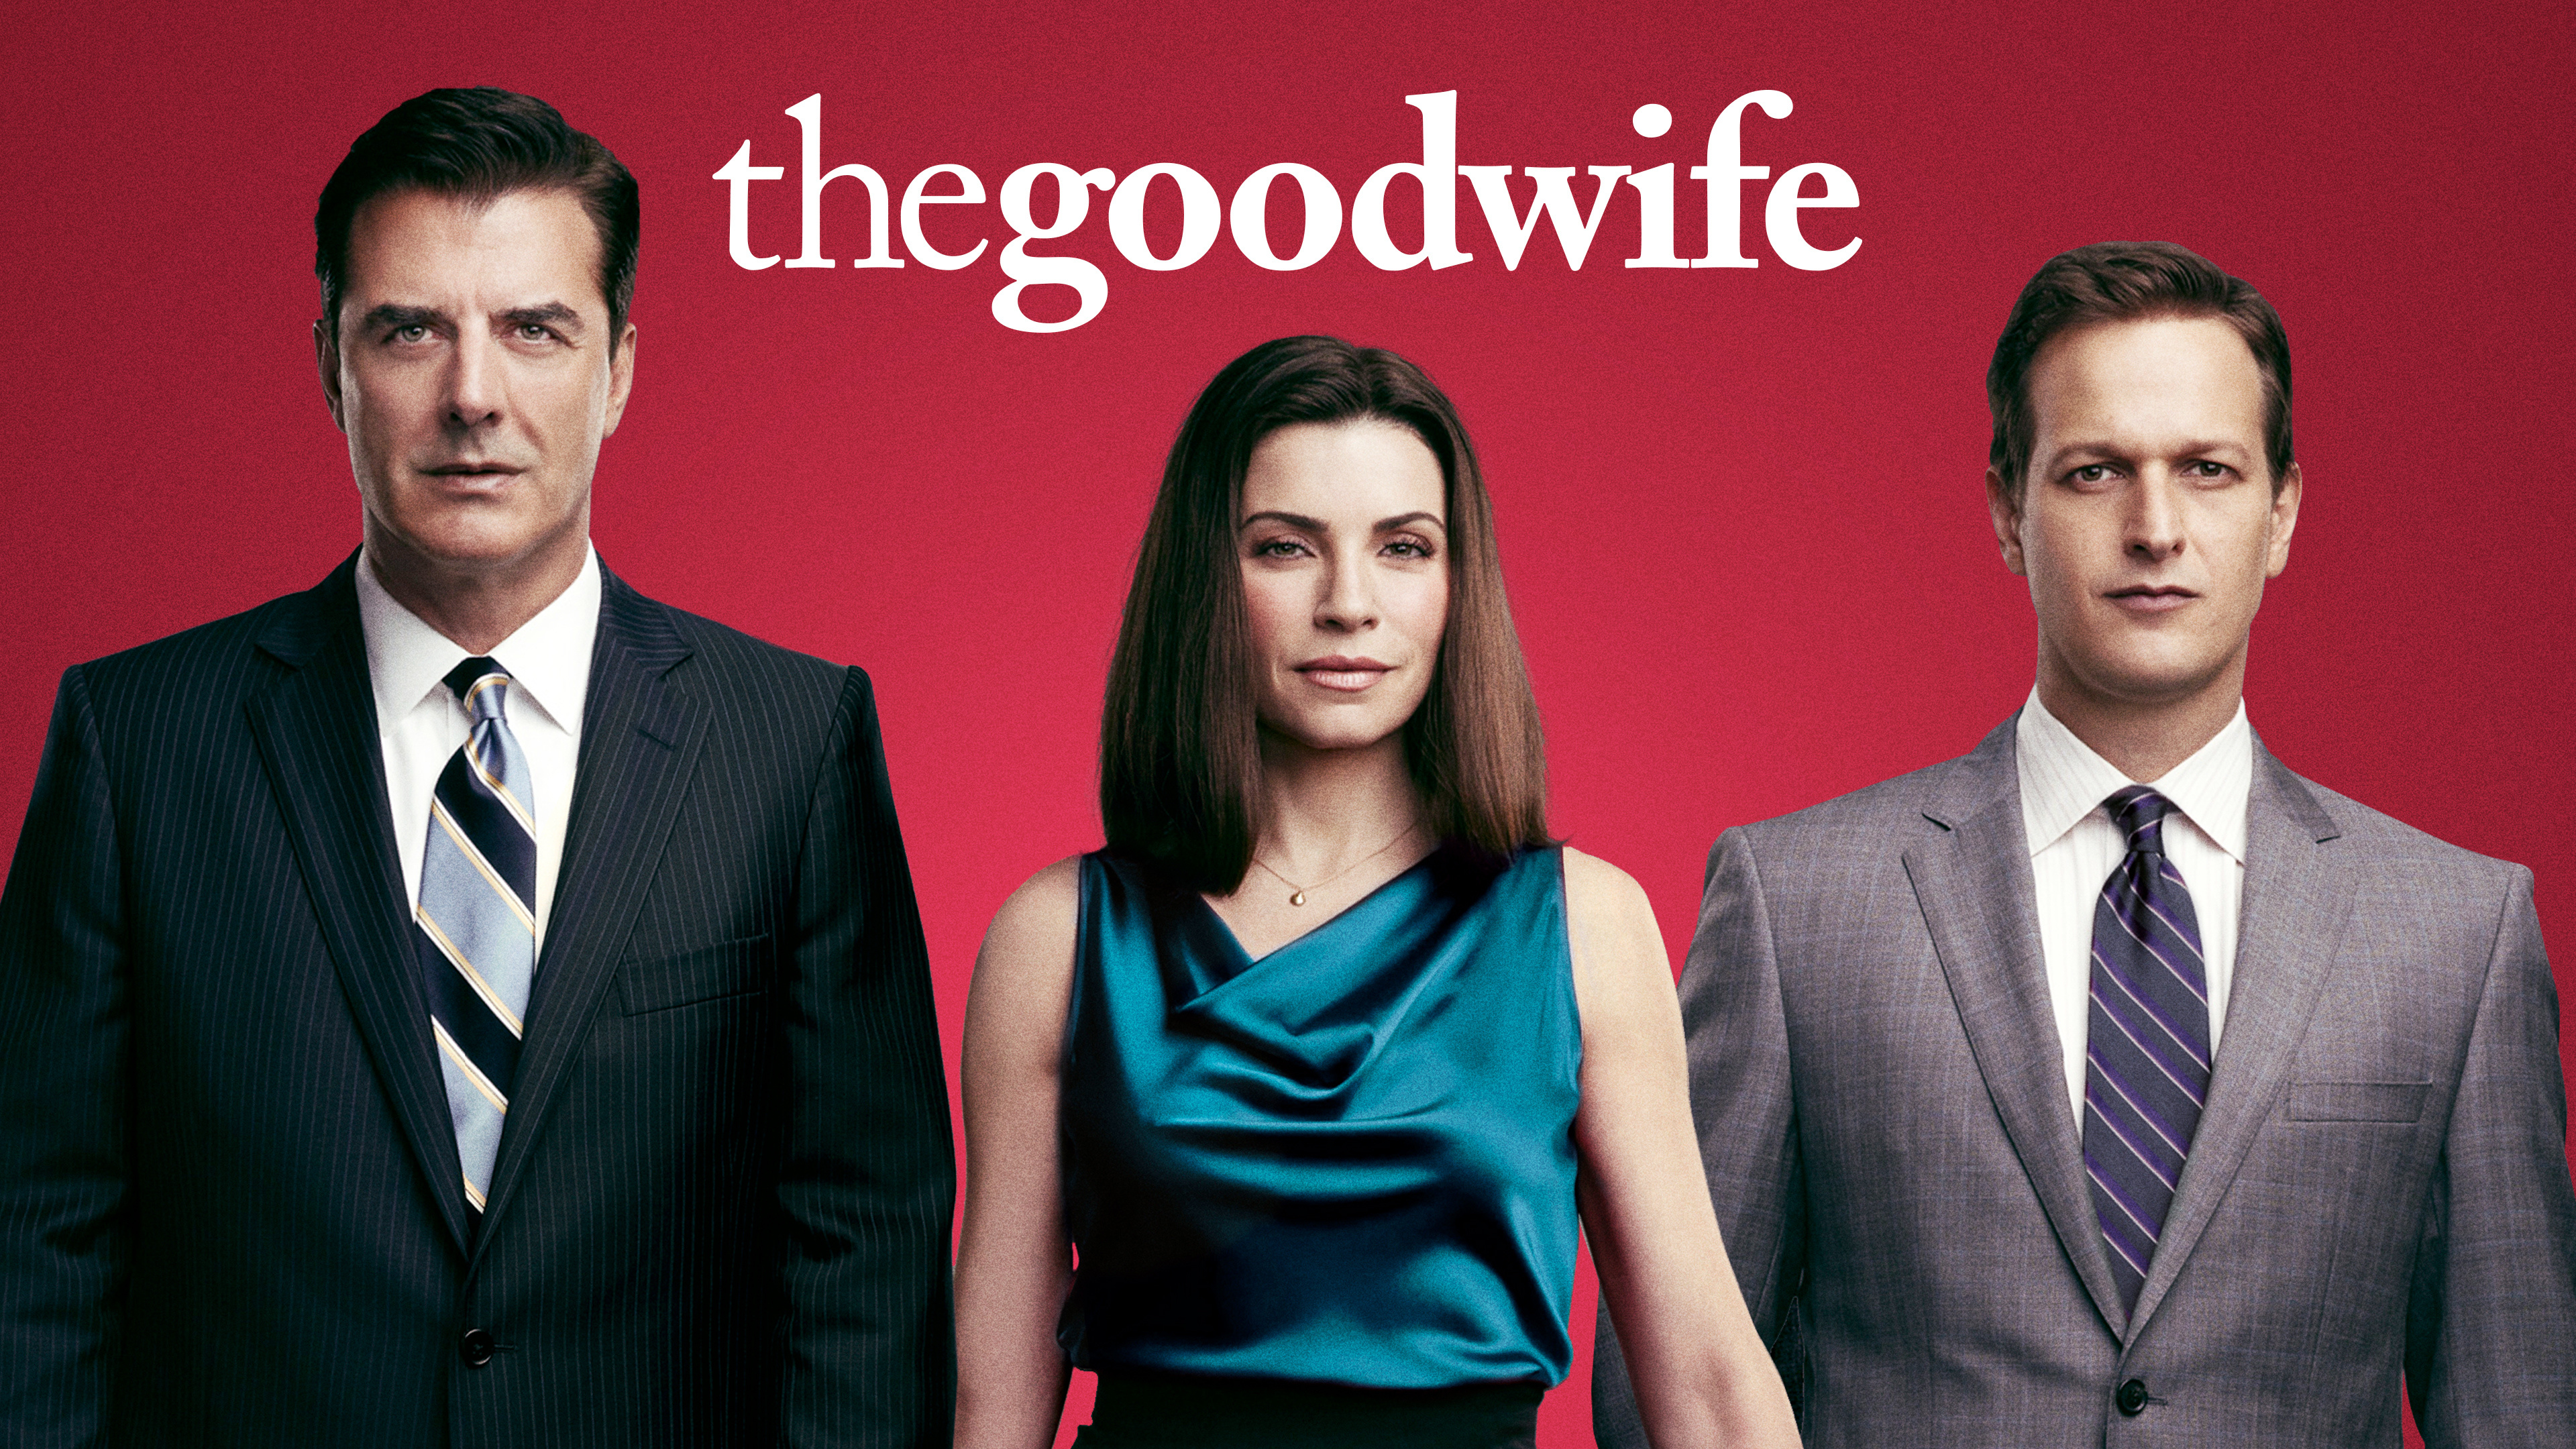 The Good Wife (TV Series): An American legal and political drama, Aired on CBS in 2009-2016. 3840x2160 4K Background.